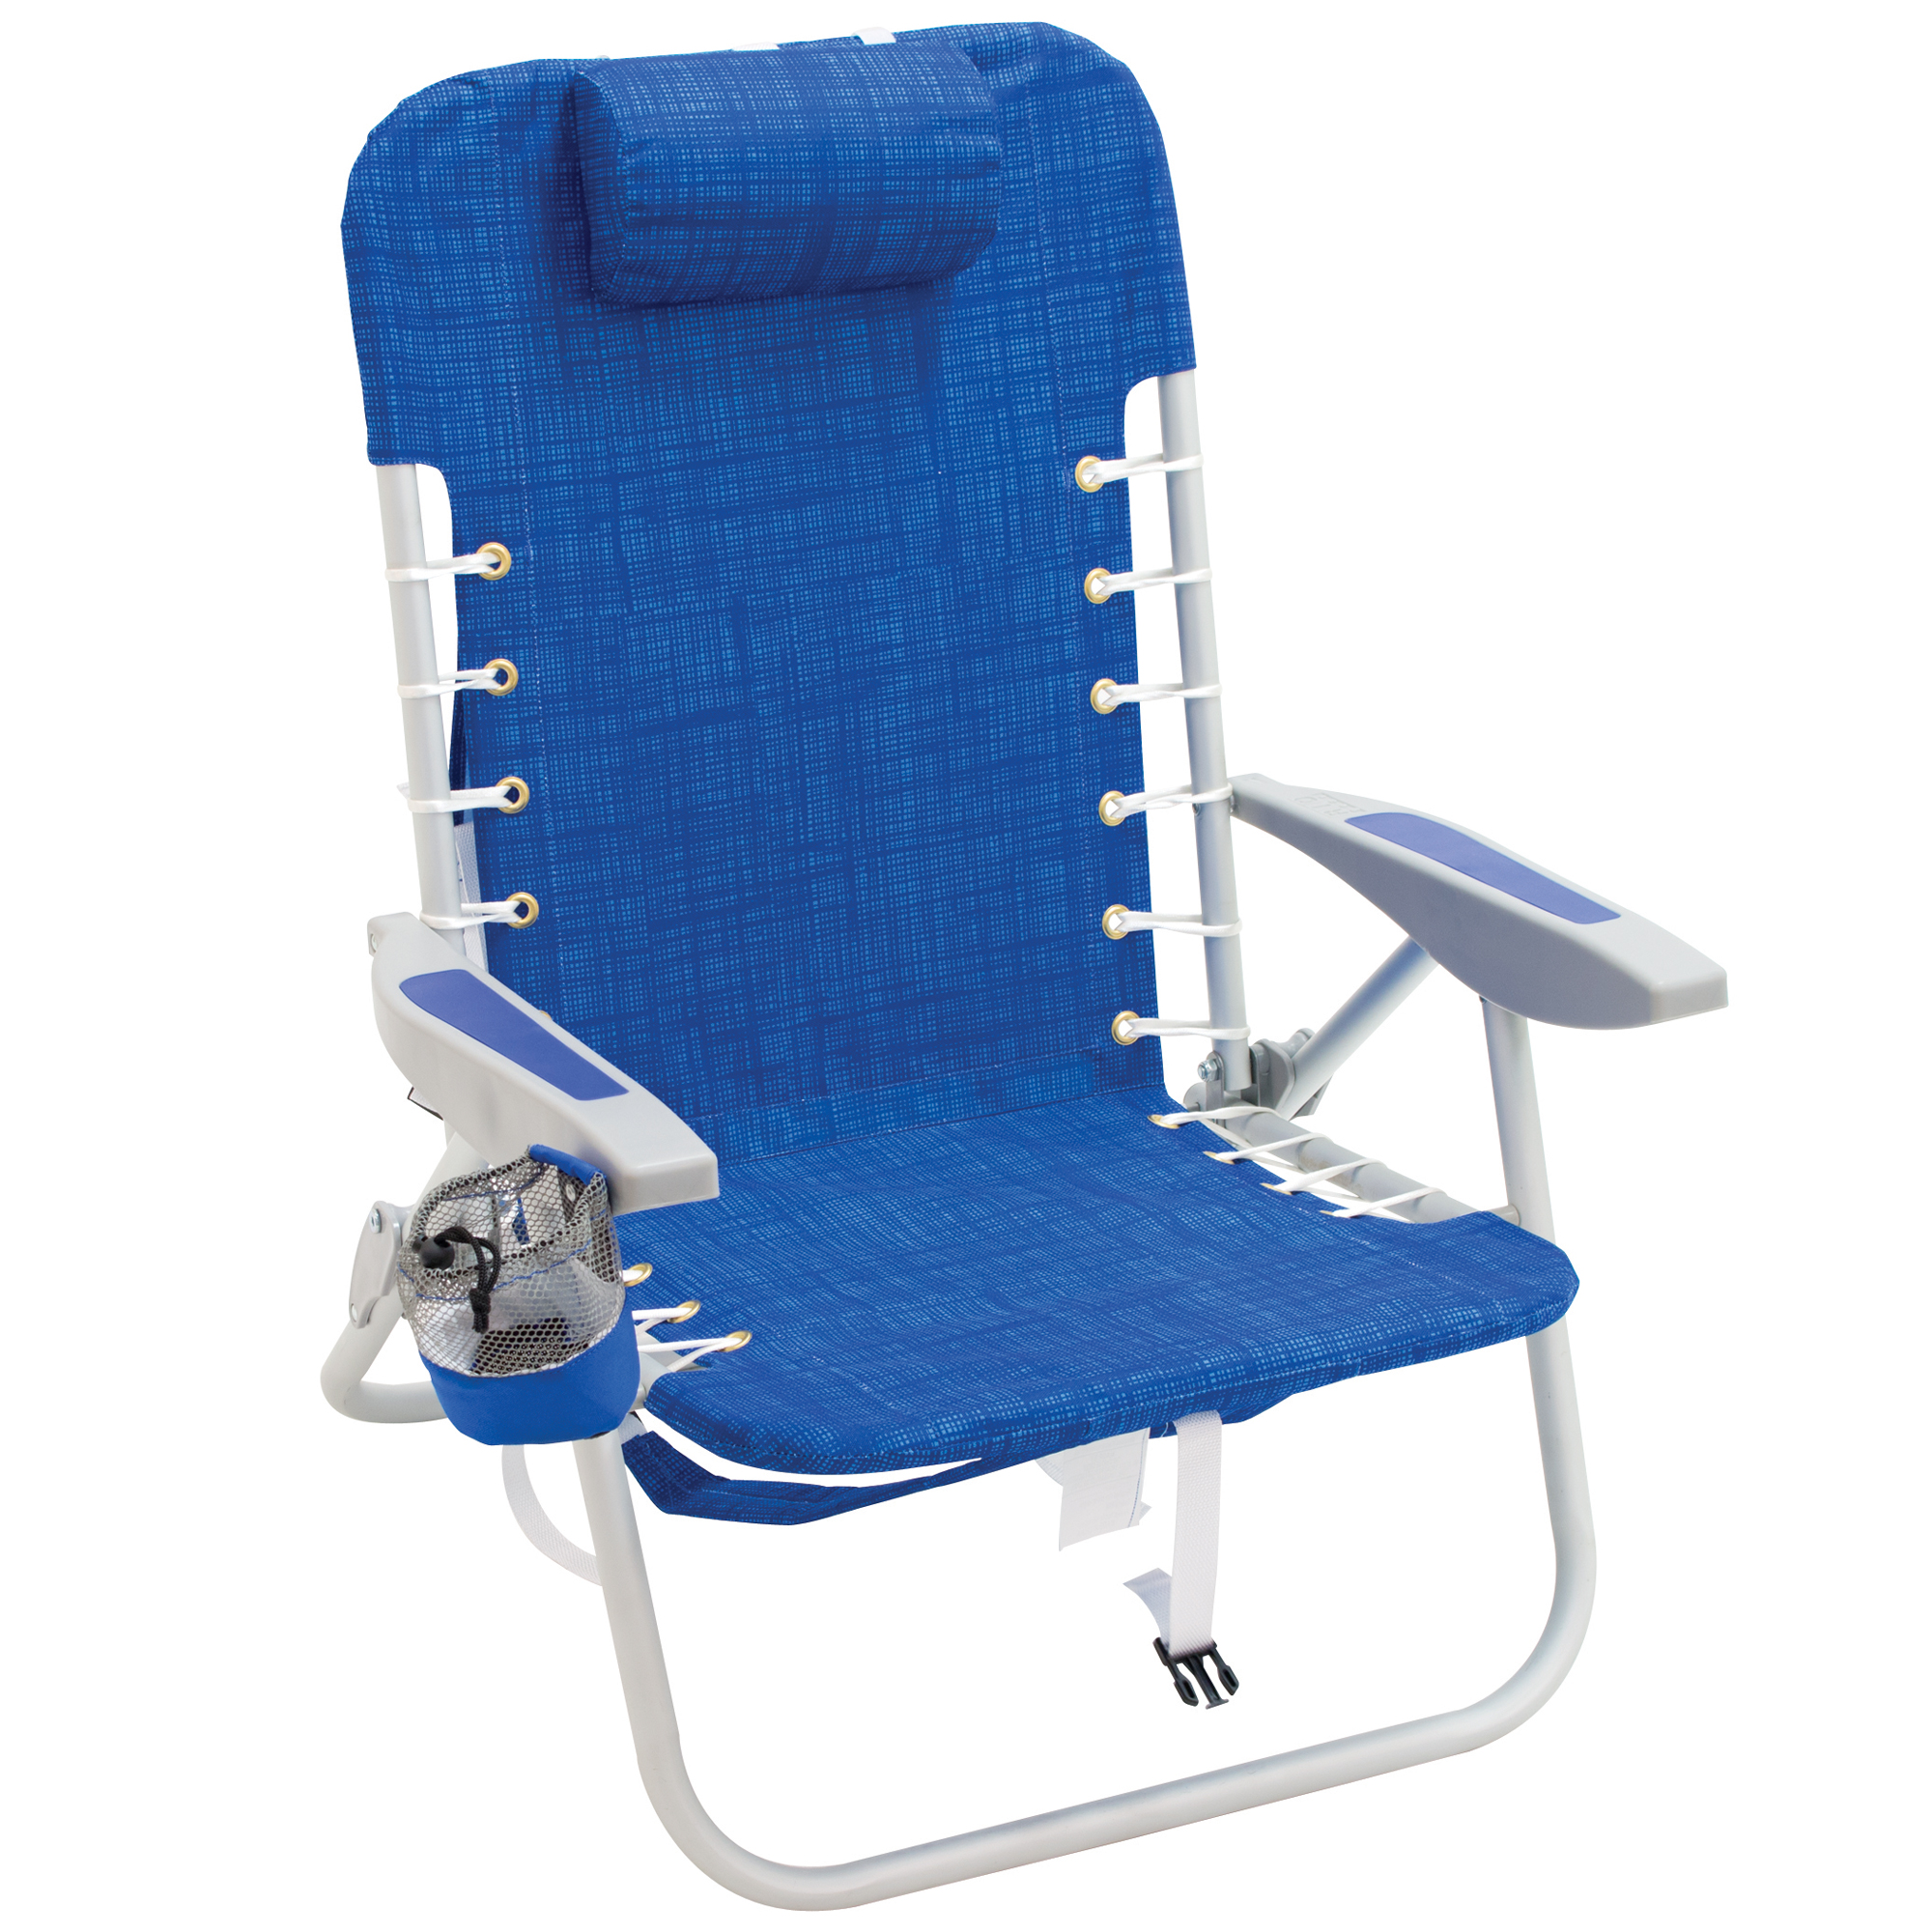 Unique Click N Carry Beach Chair Carry Strap with Simple Decor